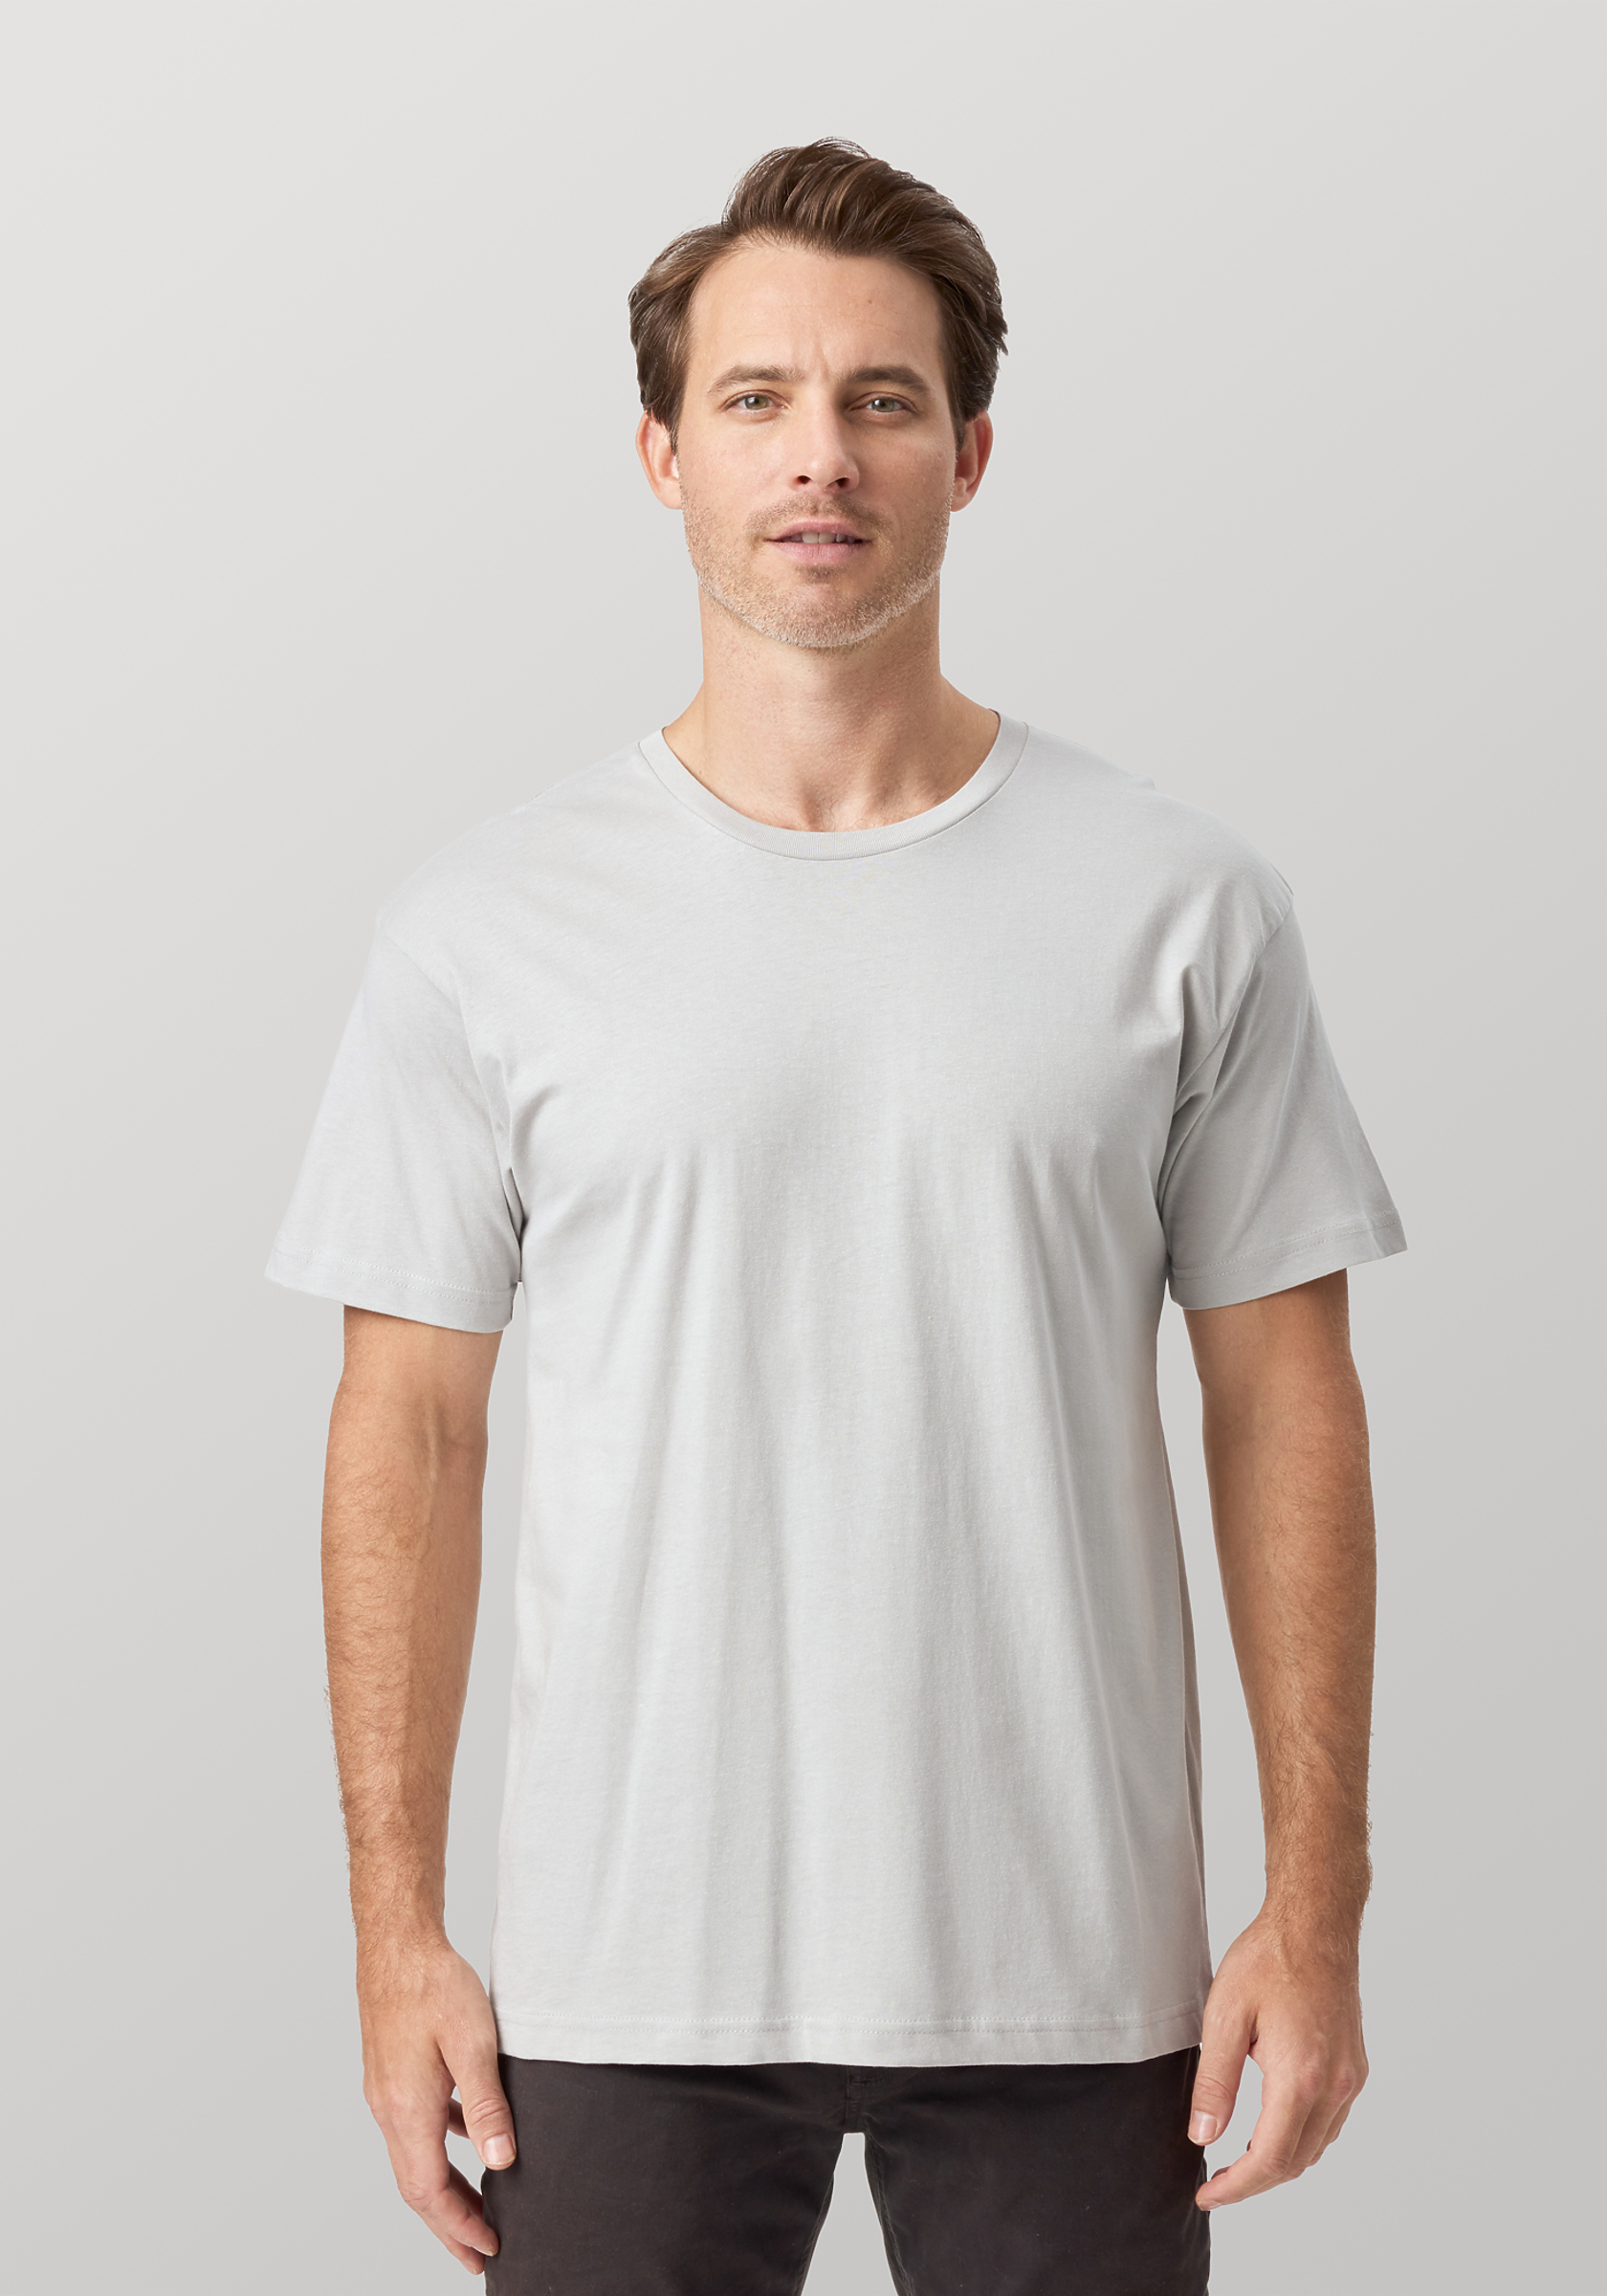 Cotton Heritage OU1690 Garment Dye Short Sleeve - From $7.12